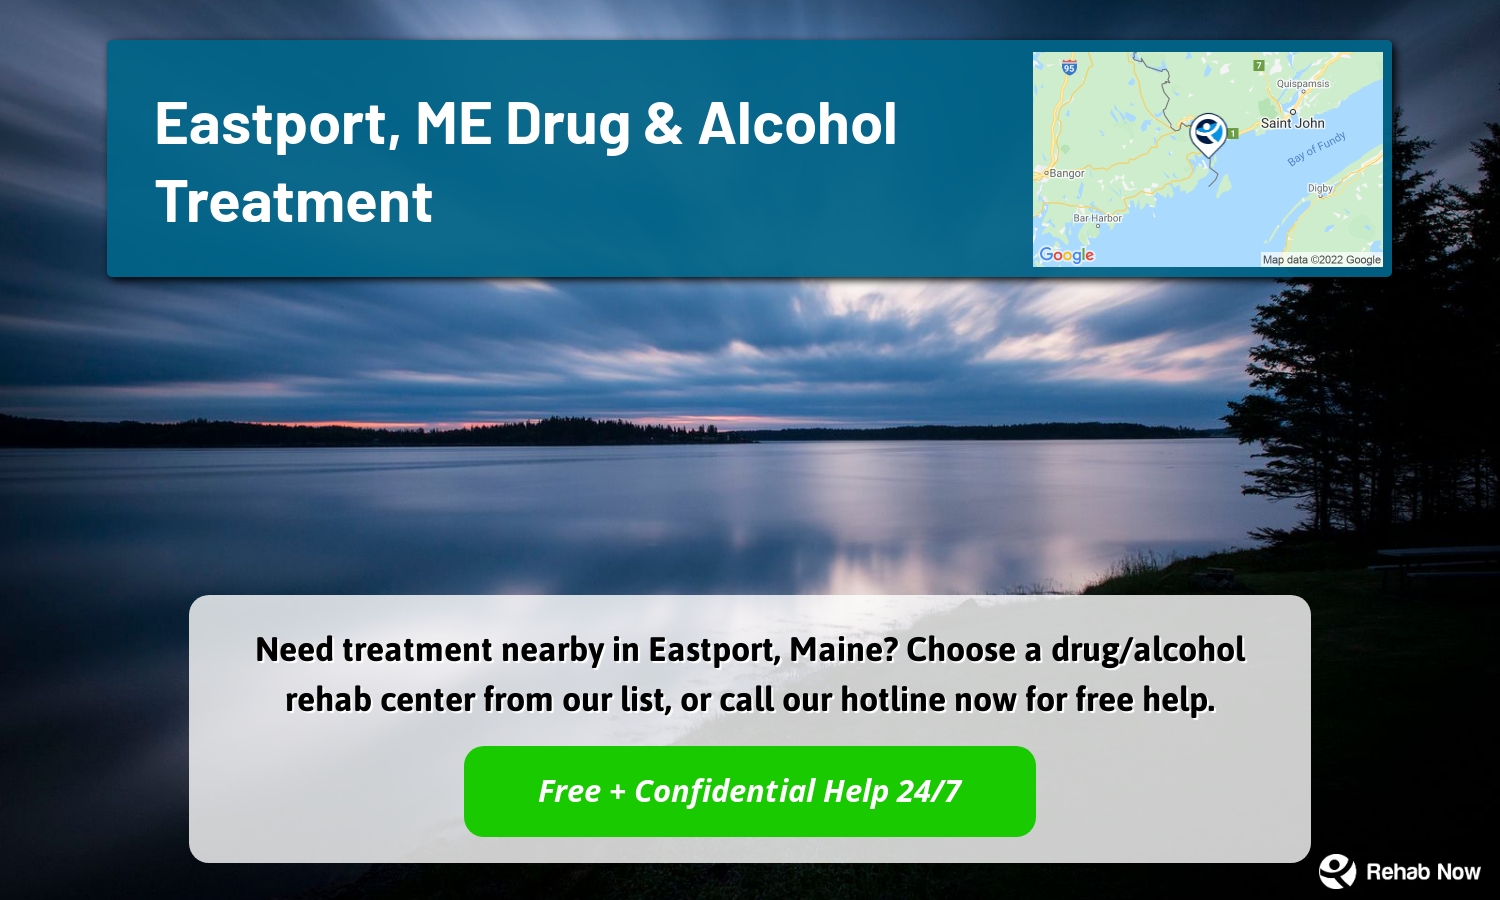 Need treatment nearby in Eastport, Maine? Choose a drug/alcohol rehab center from our list, or call our hotline now for free help.